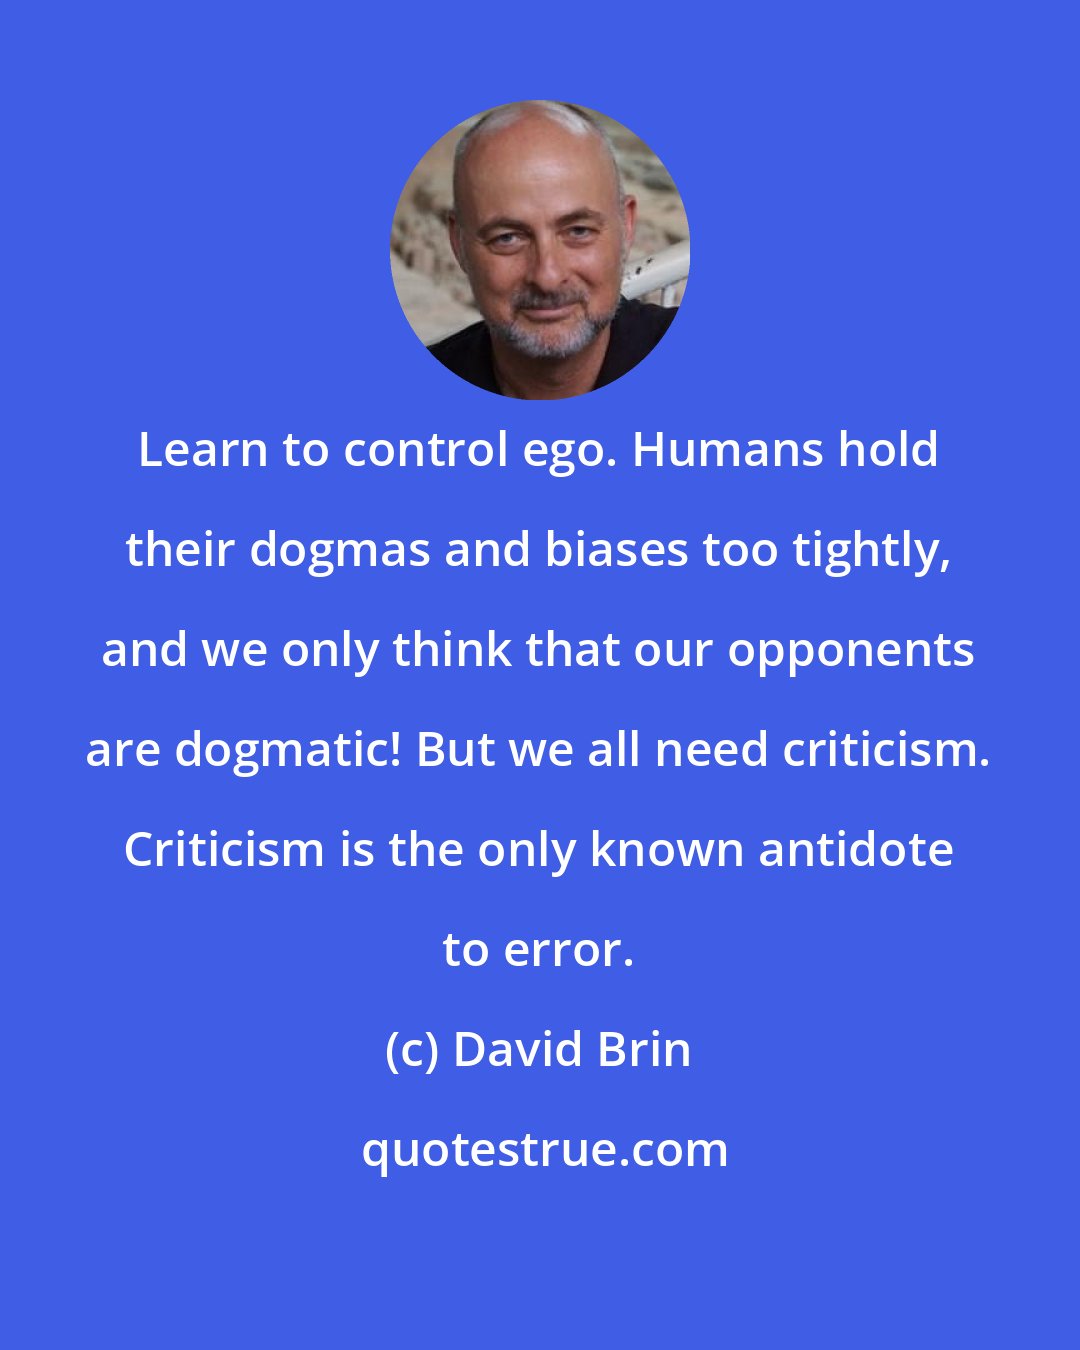 David Brin: Learn to control ego. Humans hold their dogmas and biases too tightly, and we only think that our opponents are dogmatic! But we all need criticism. Criticism is the only known antidote to error.